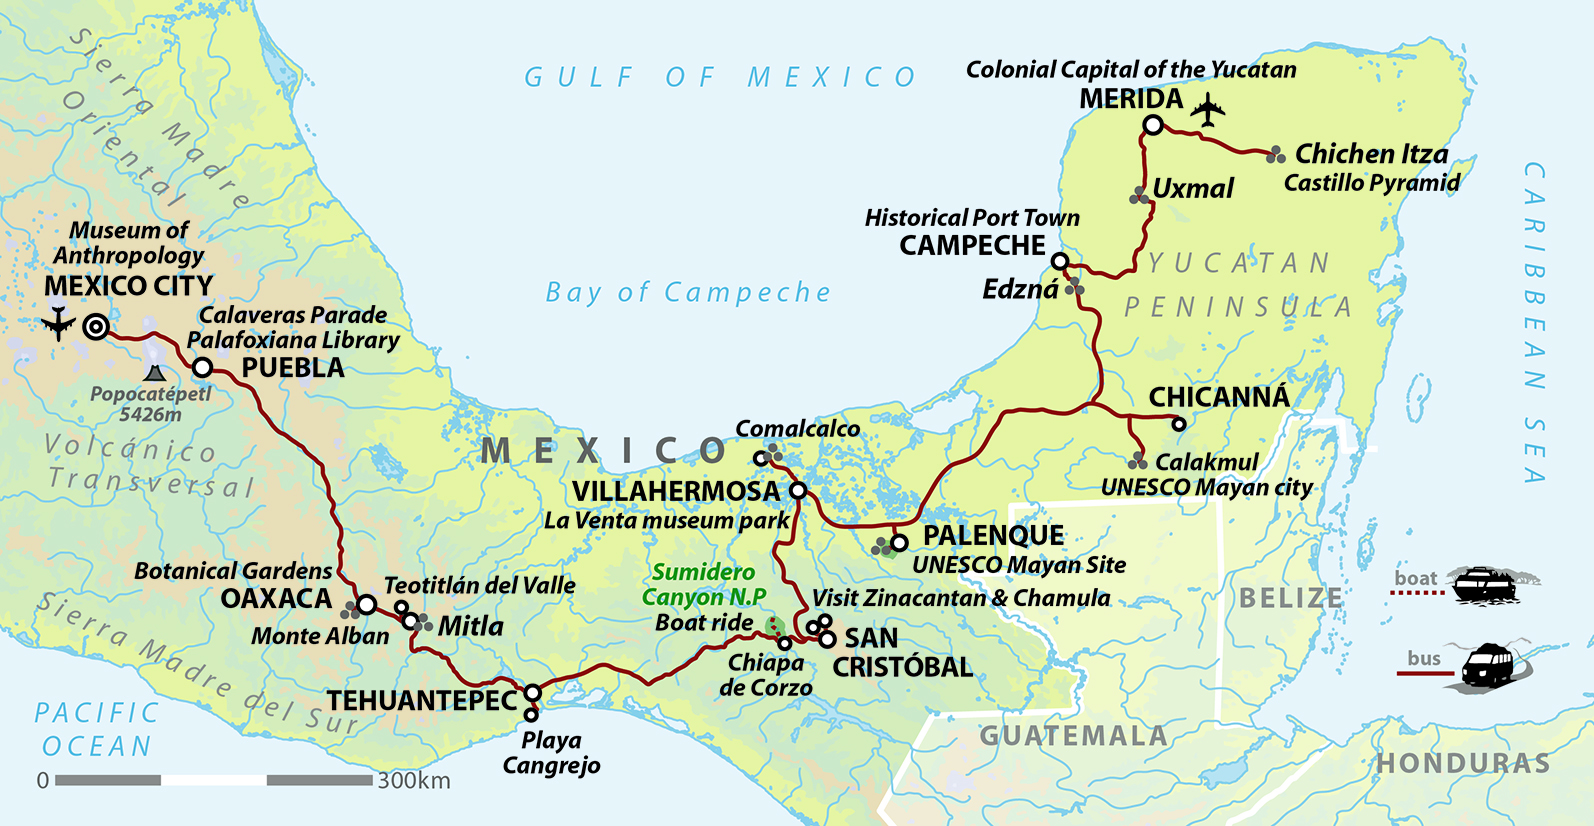 tourhub | Wild Frontiers | Mexico: Through The Mayan Heartlands (Day of the Dead) | Tour Map